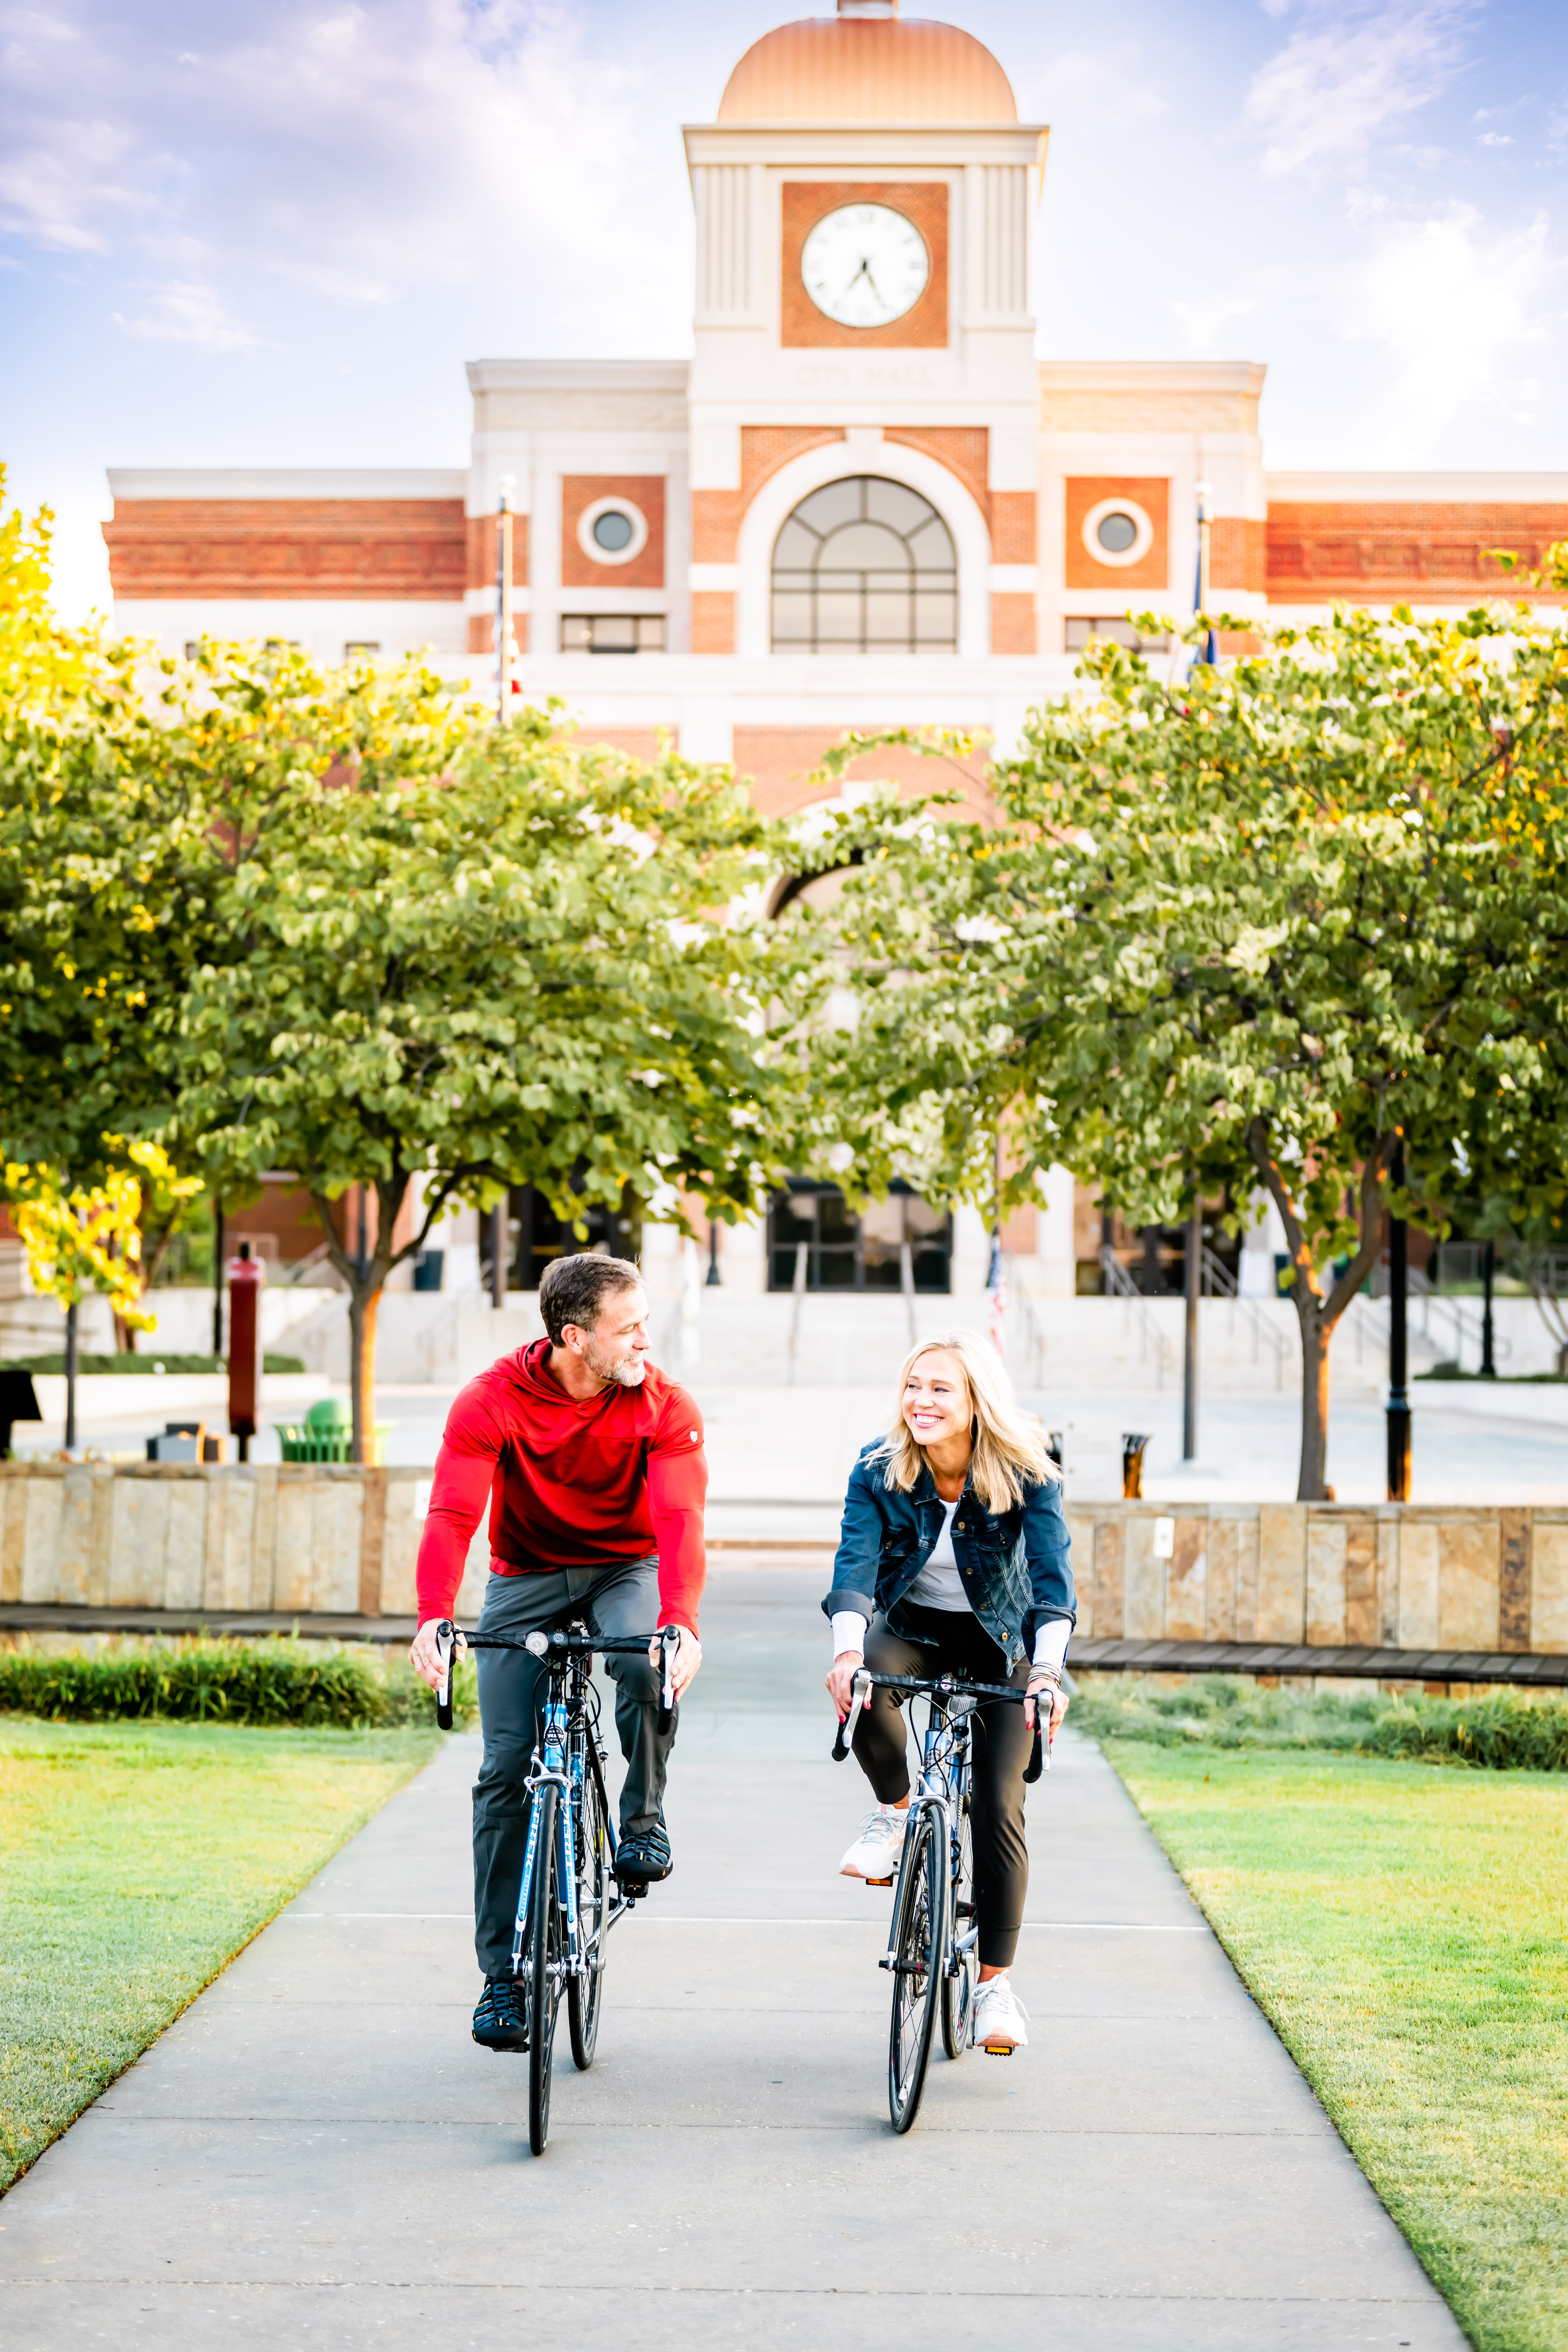 Couple Biking in front of City Hall